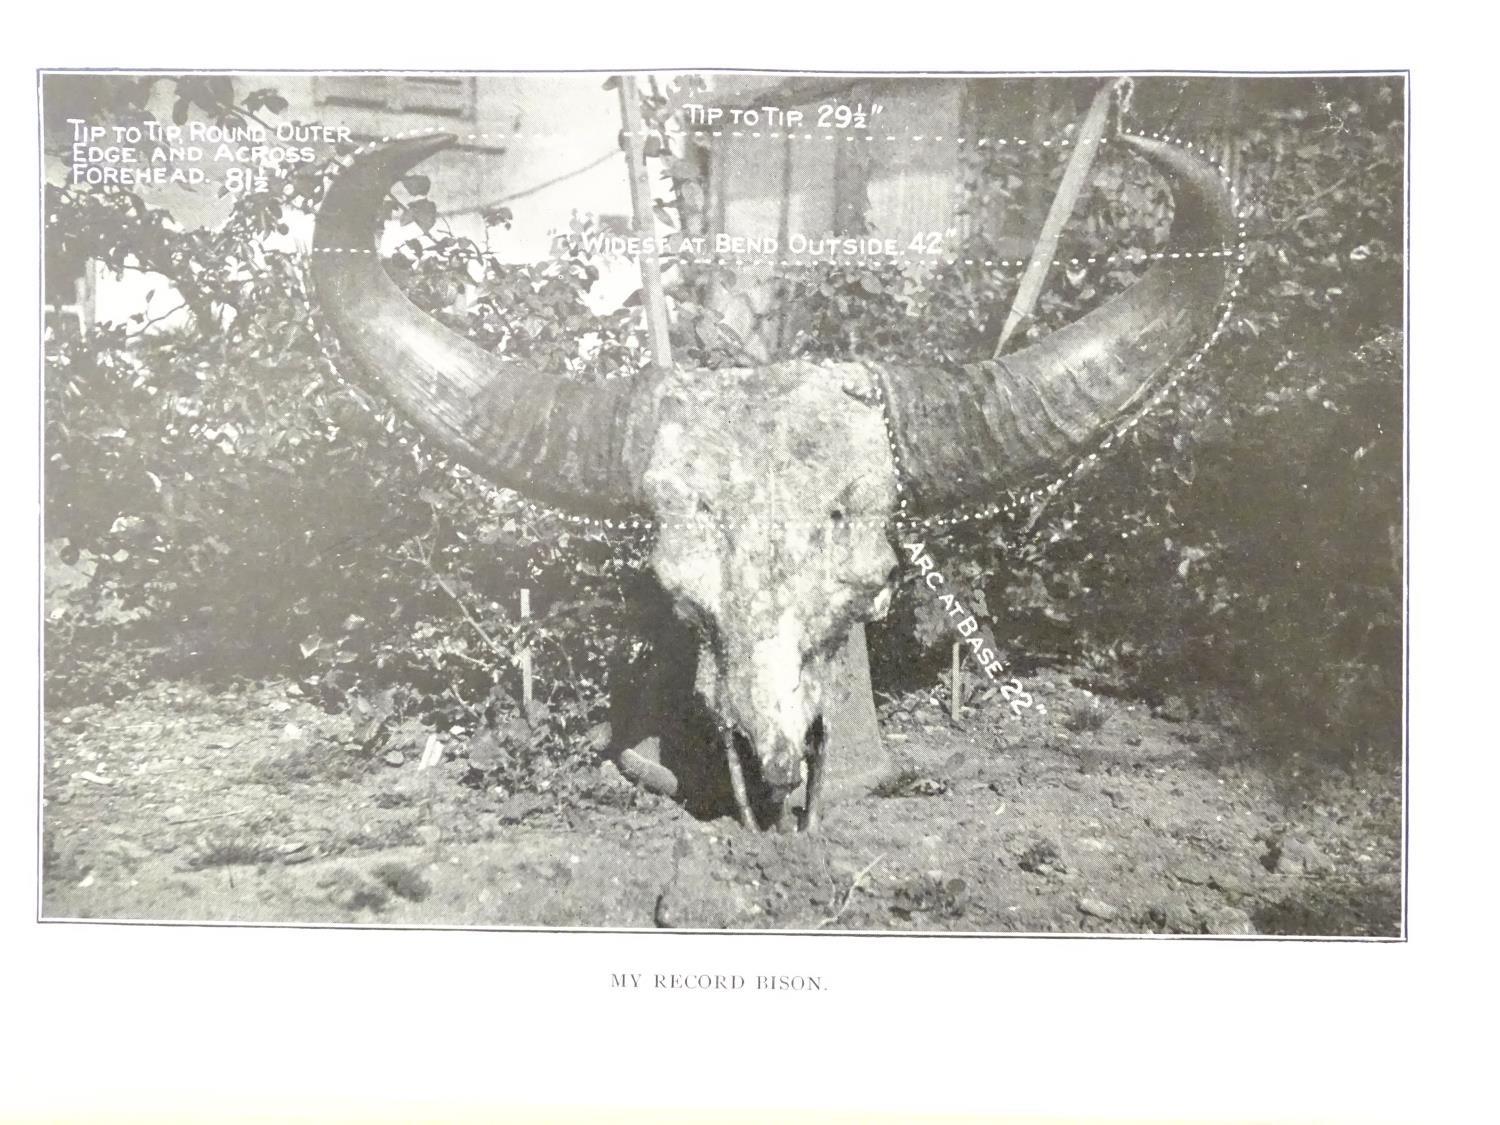 Book: First Edition copy of 'Days and Nights with Indian Big Game' by Major-General A. E. Wardrop, - Image 7 of 7